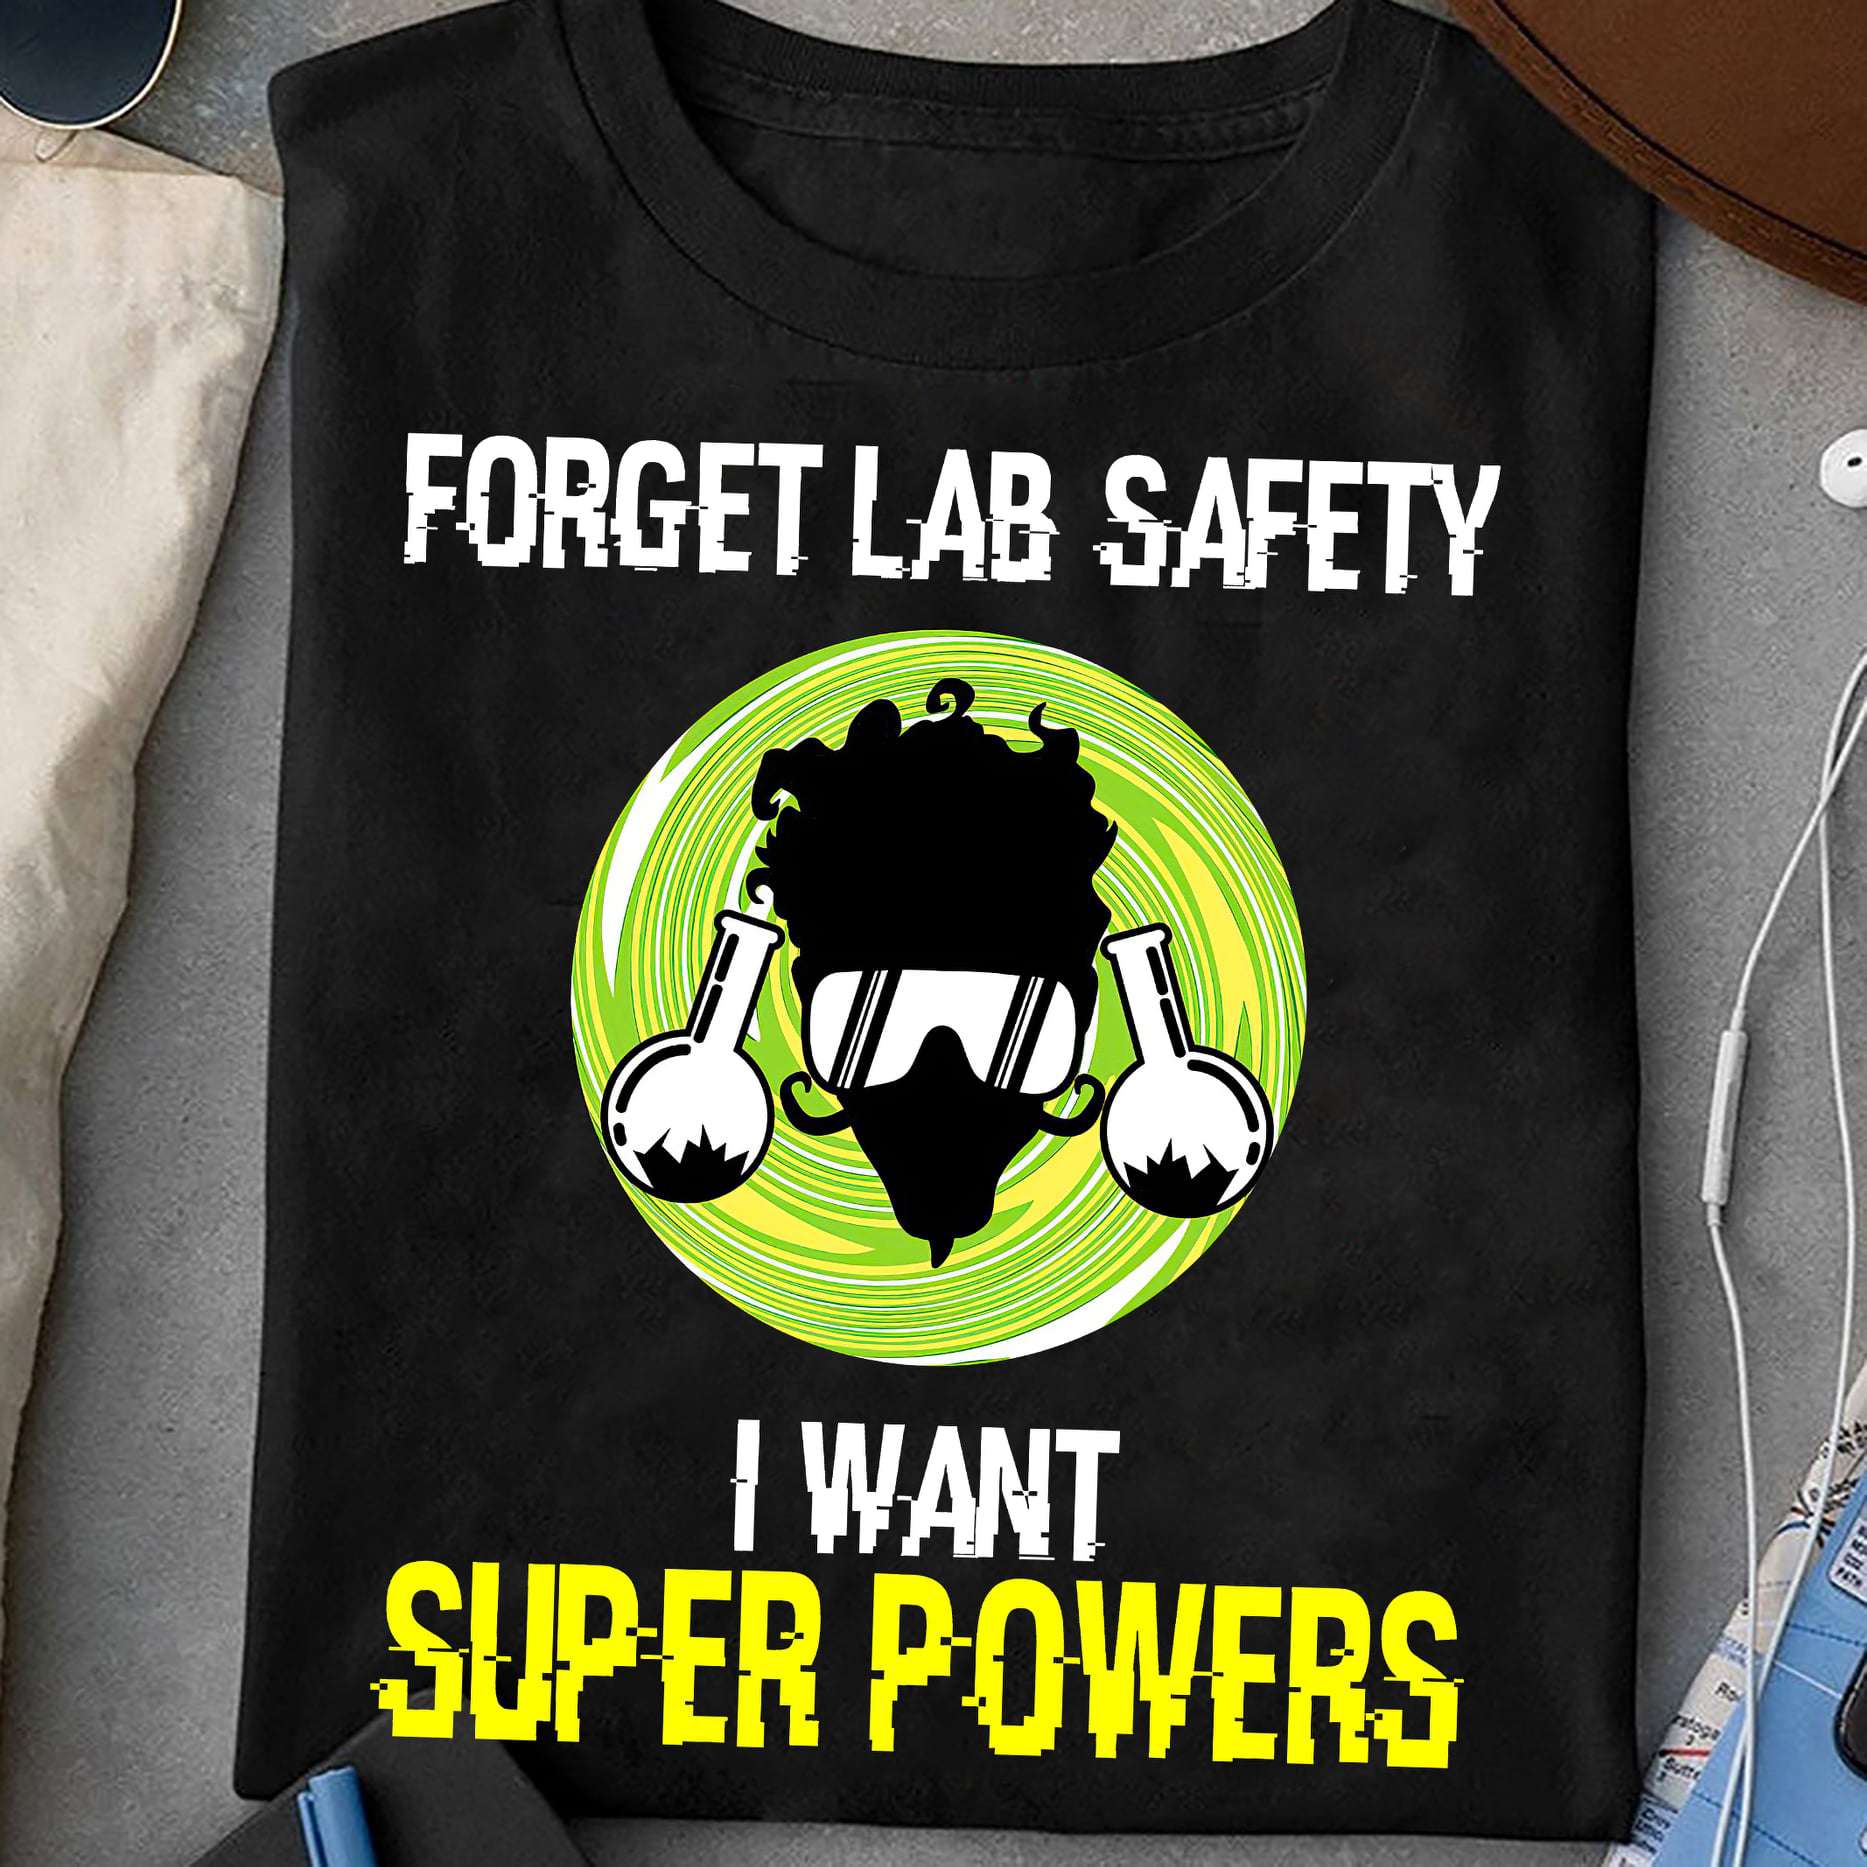 Science Lab, T-shirt for scientists - Forget lab safety i want super powers